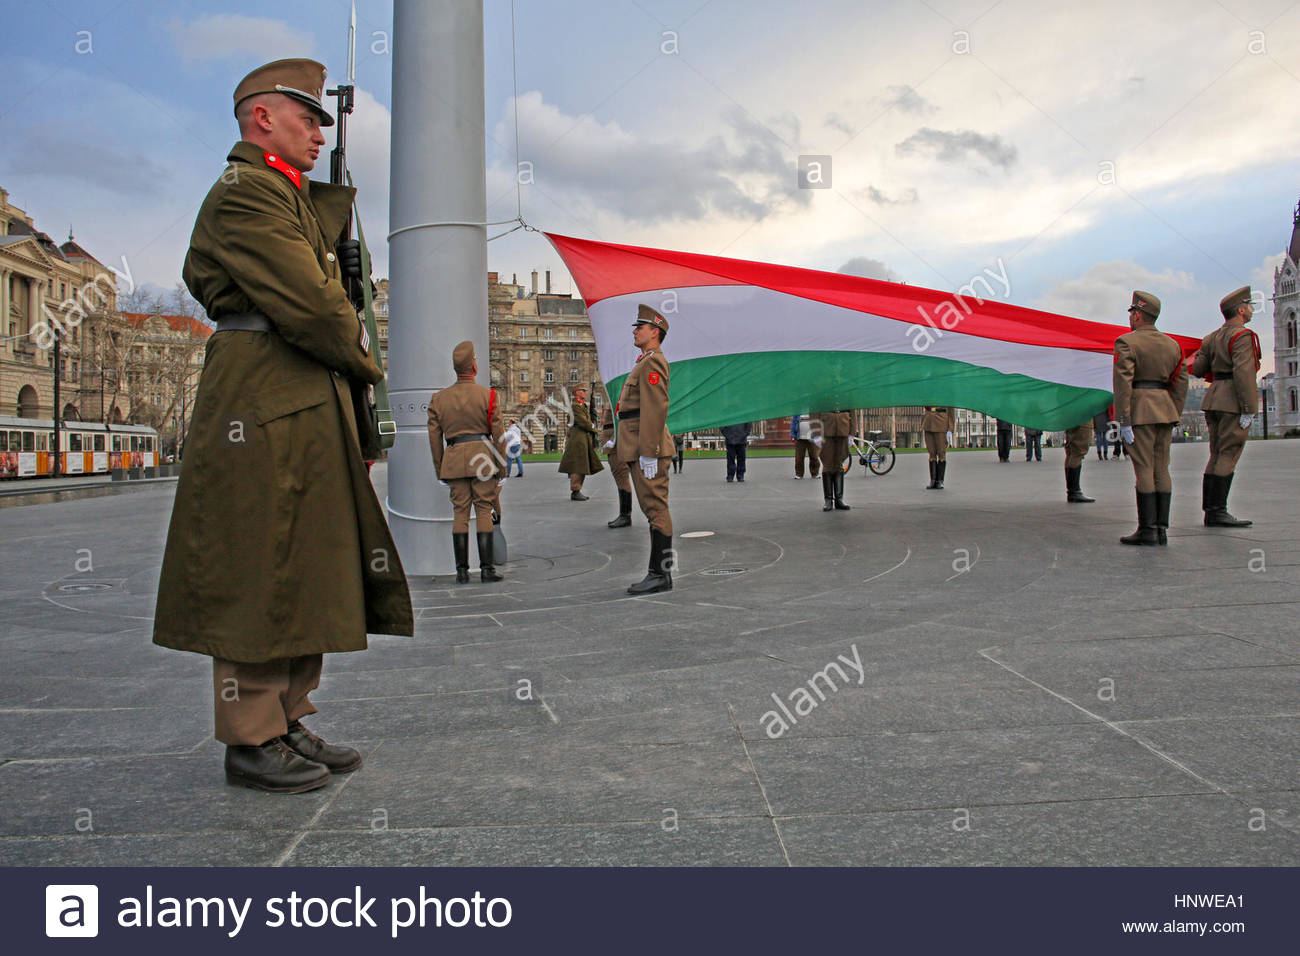 Hungarian guards perform the raising of the national flag ceremony in front of parliament in Budapest, Hungary. Stock Photo